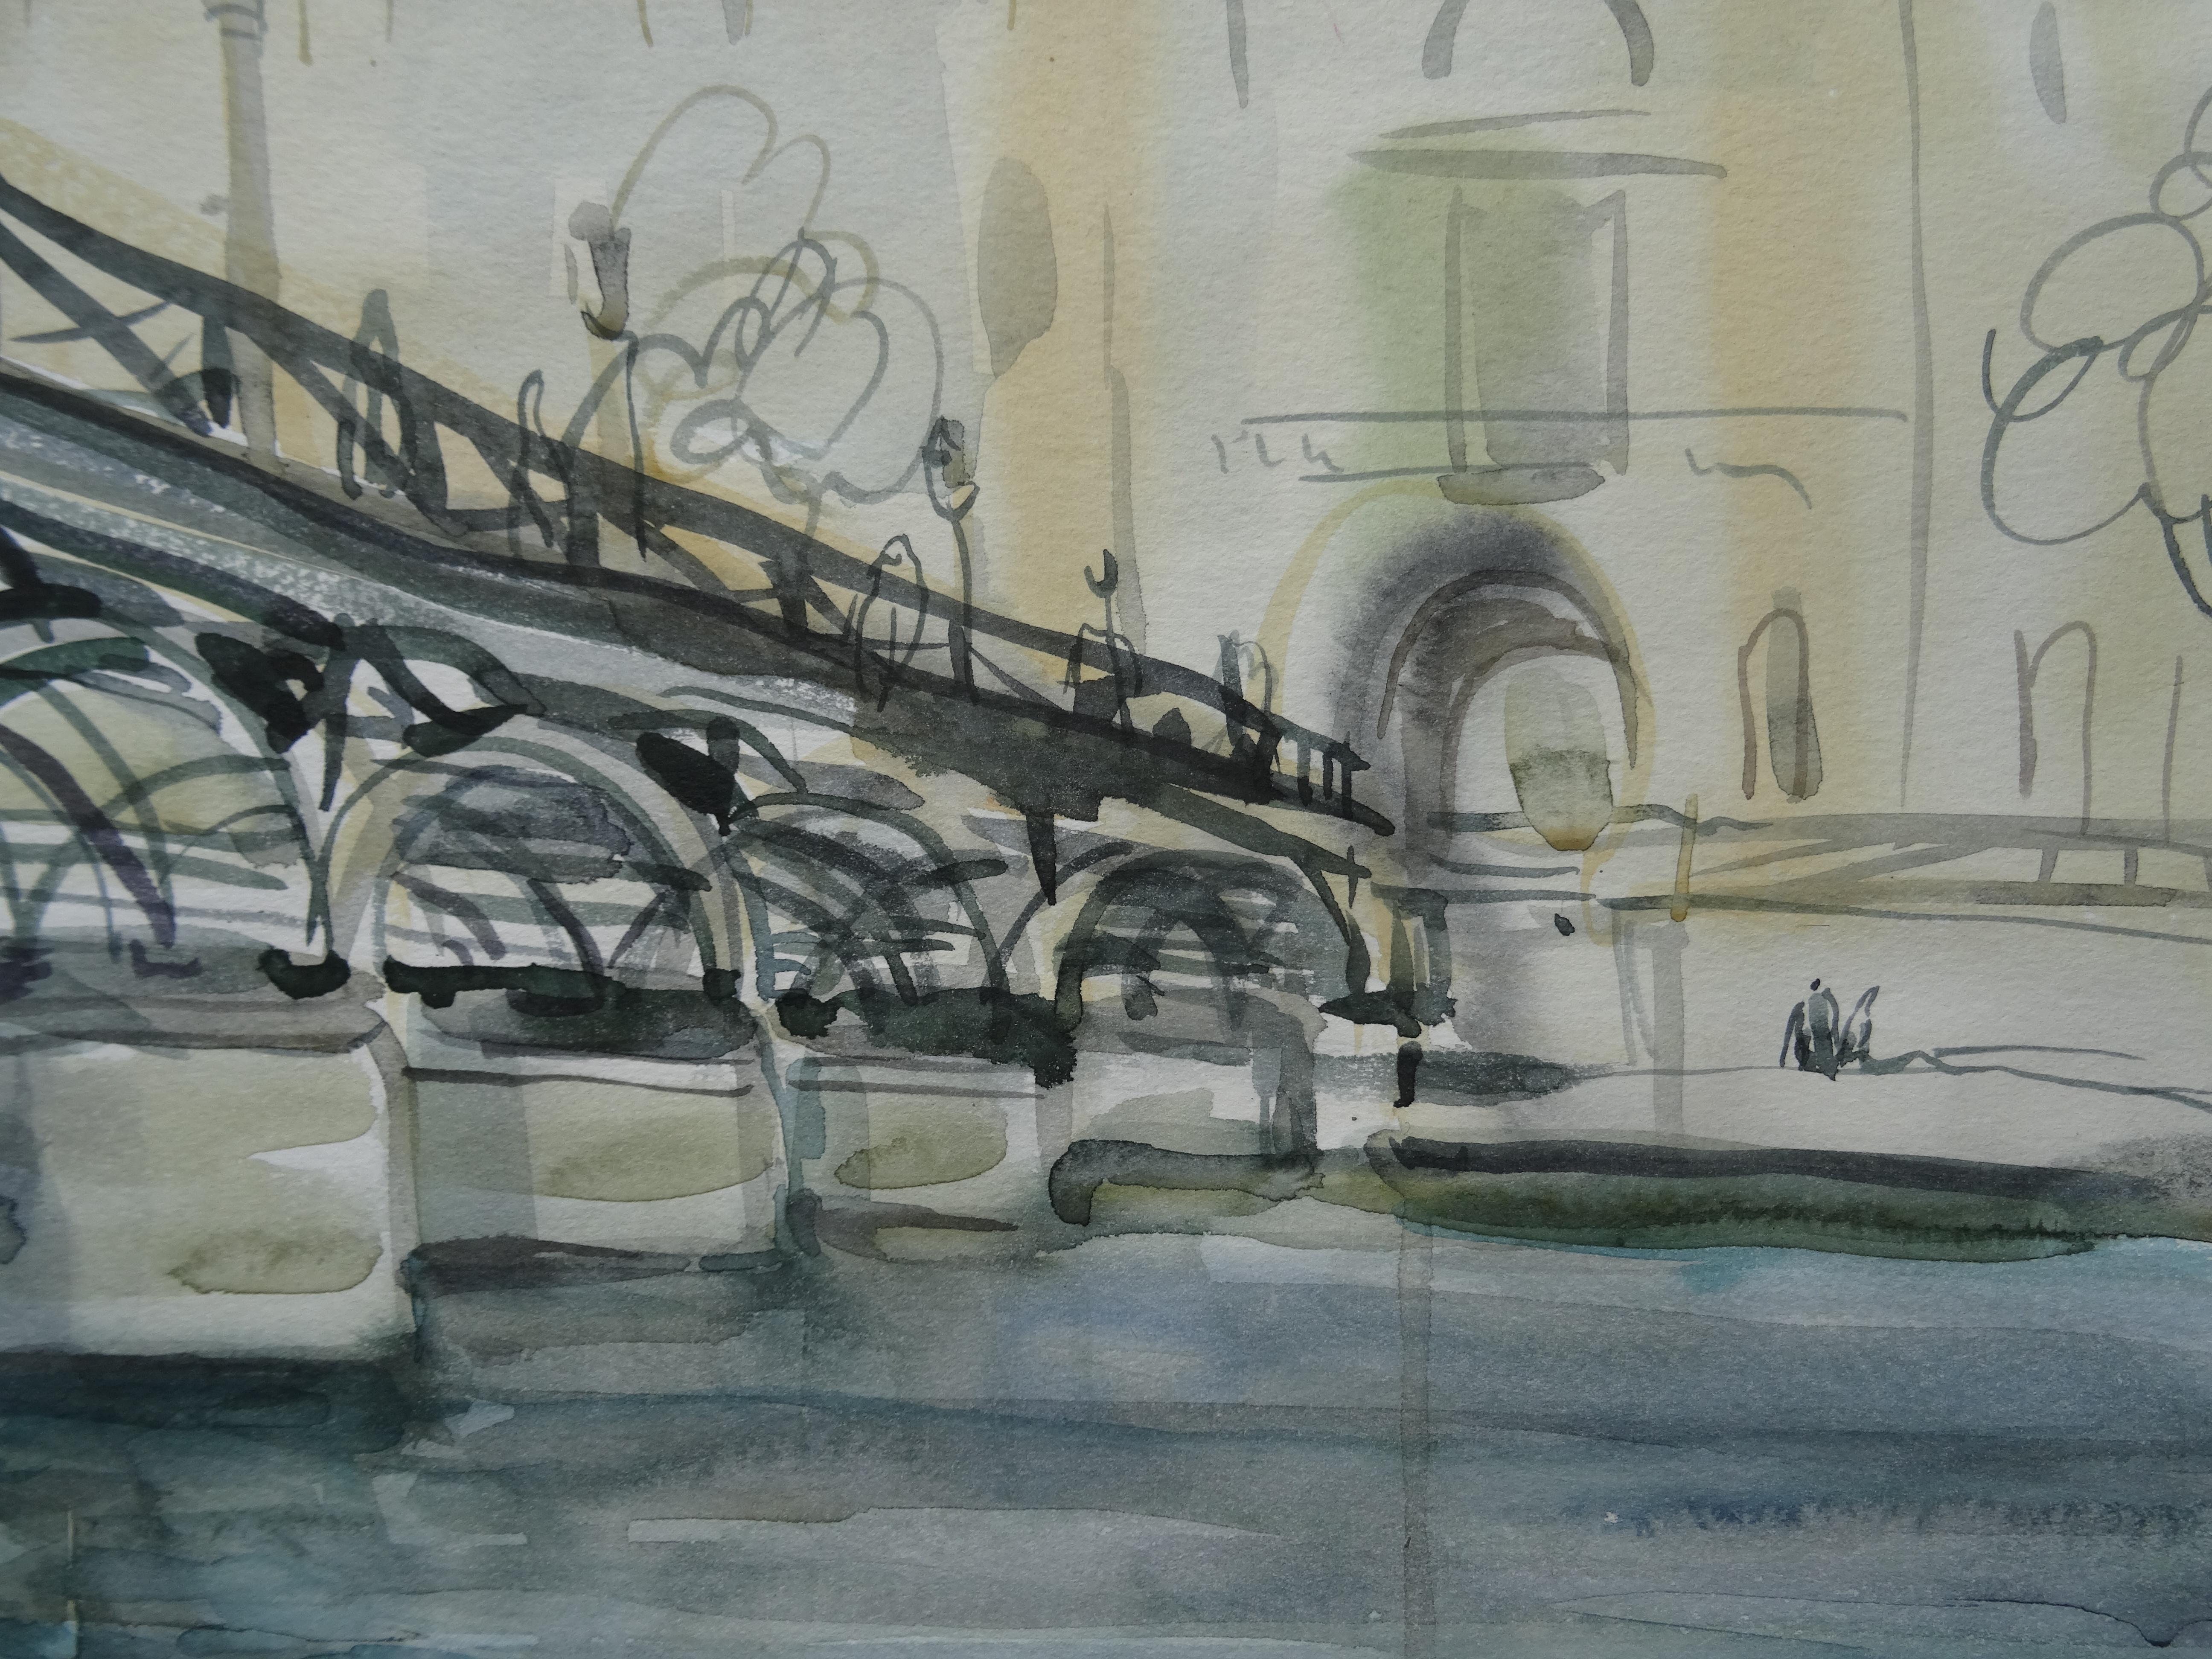 Pont des Arts. 2010. Watercolor on paper, 40x50 cm
View on the bridge at Paris. Artwork In gray and light yellow colors

Ingrida Irbe (1969)

 Born 15th of June 1969 in Riga

 Education:

1980. – 1987. J. Rozentals Riga Art College

1988. – 1994.